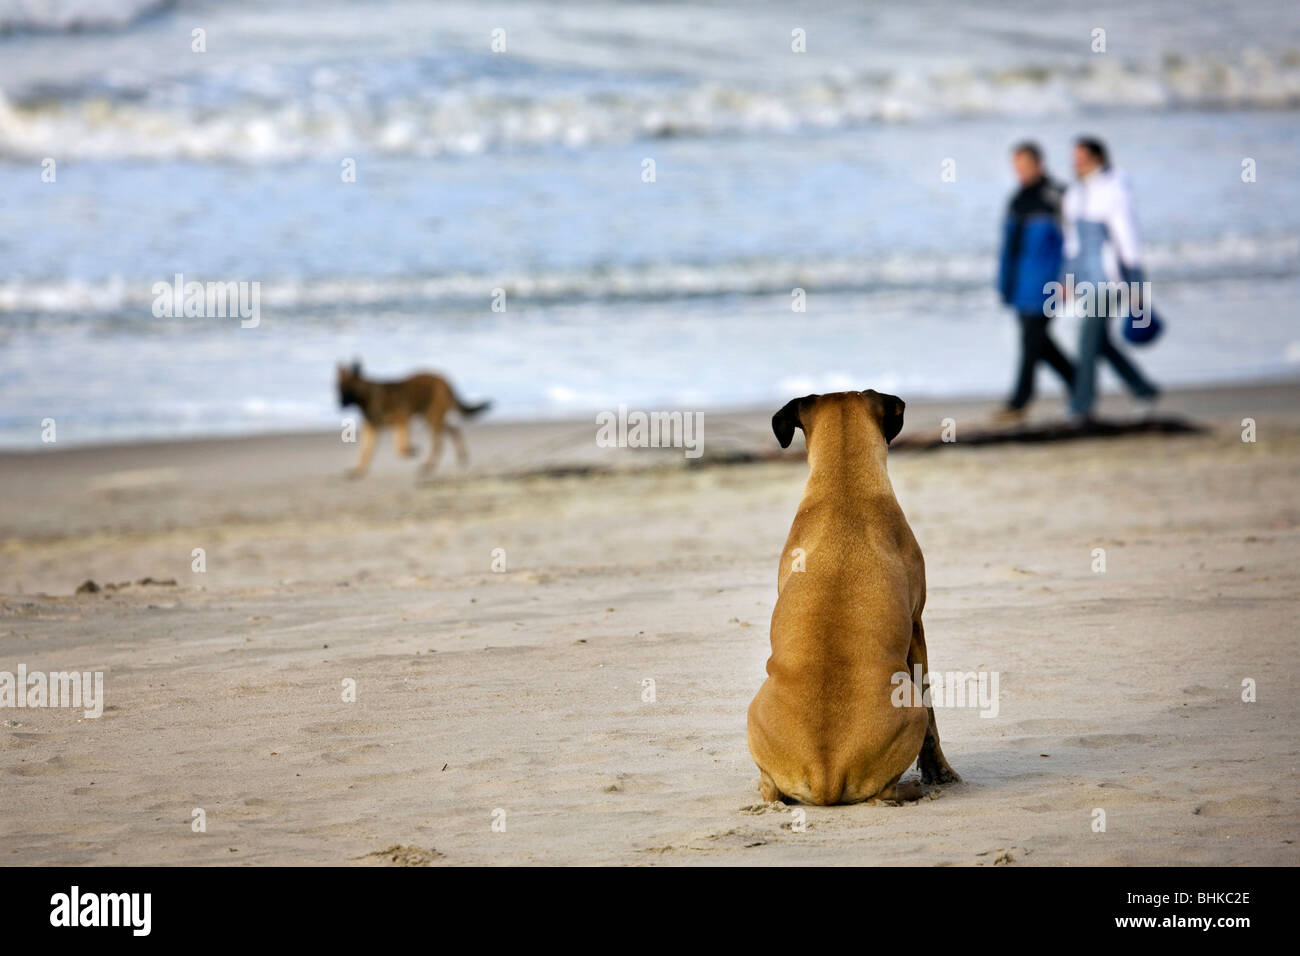 Boxer (Canis lupus familiaris) sitting in the sand watching other dog and people passing by on the beach Stock Photo